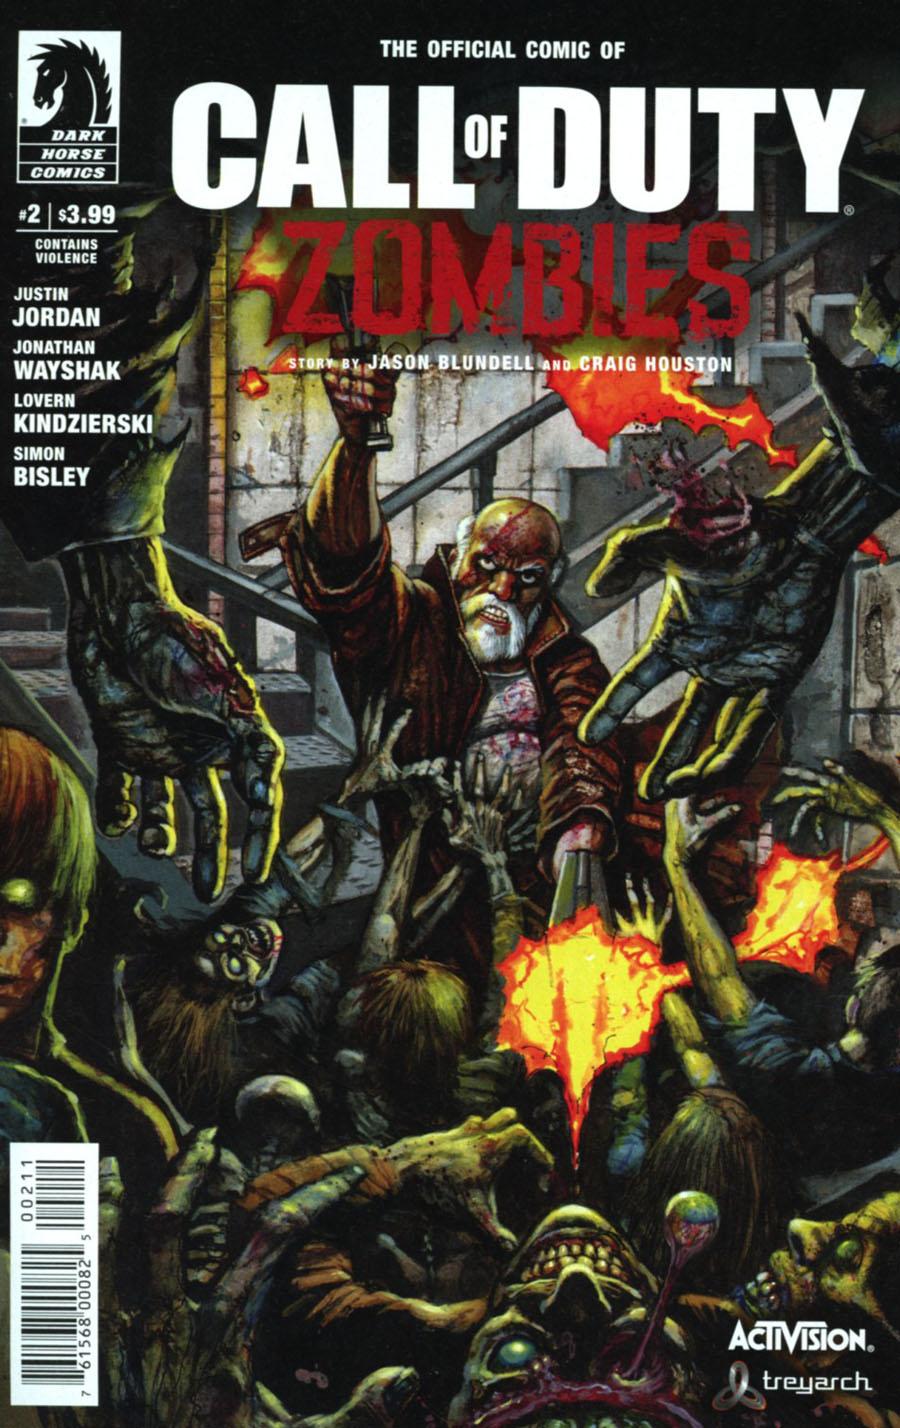 Call Of Duty Zombies Vol. 1 #2